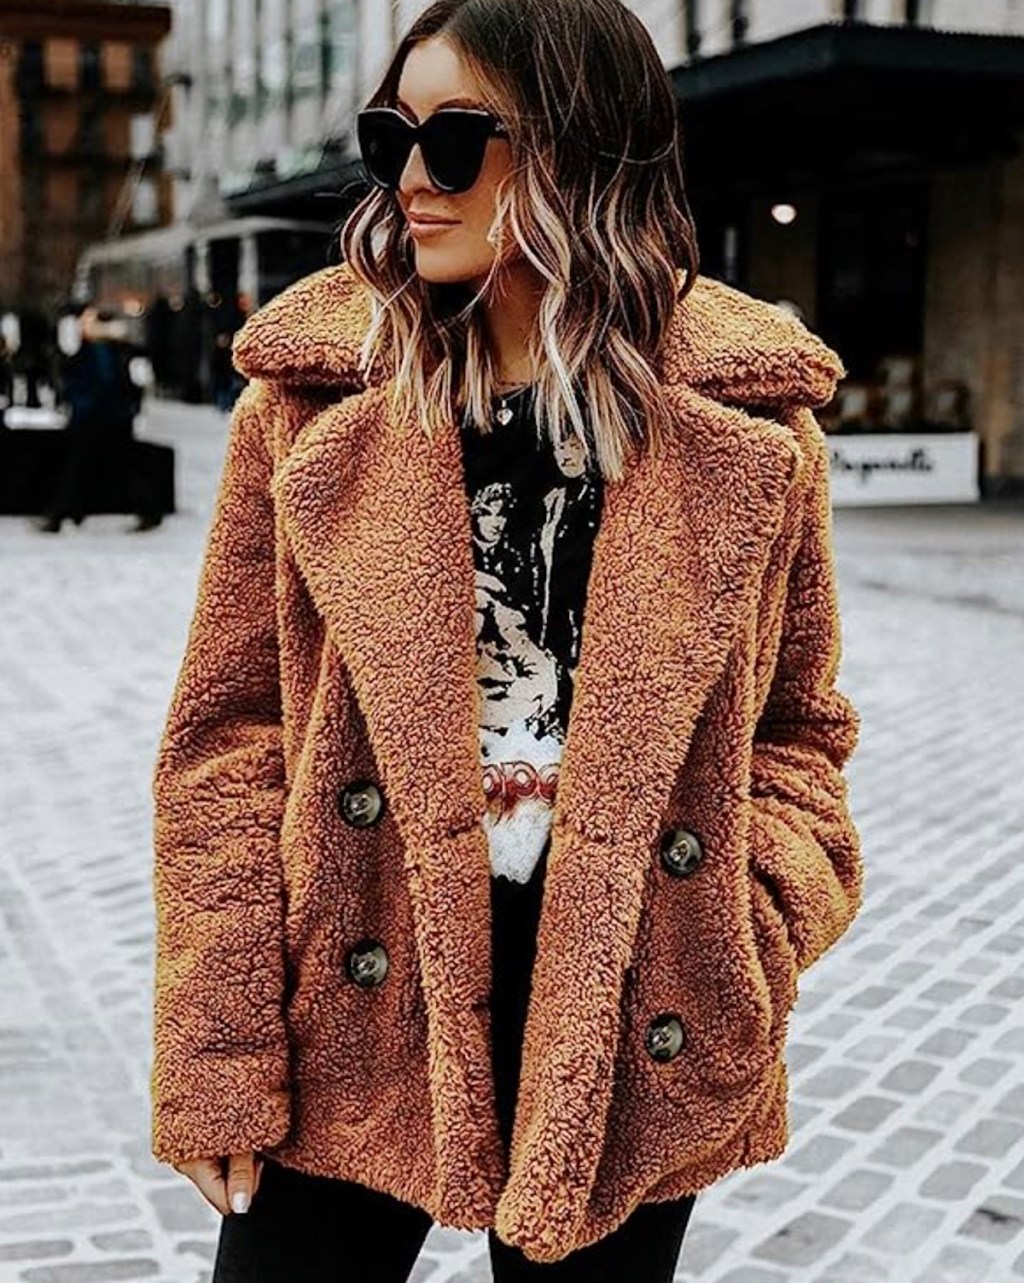 woman wearing brown sherpa jacket and oversized sunglasses in city street